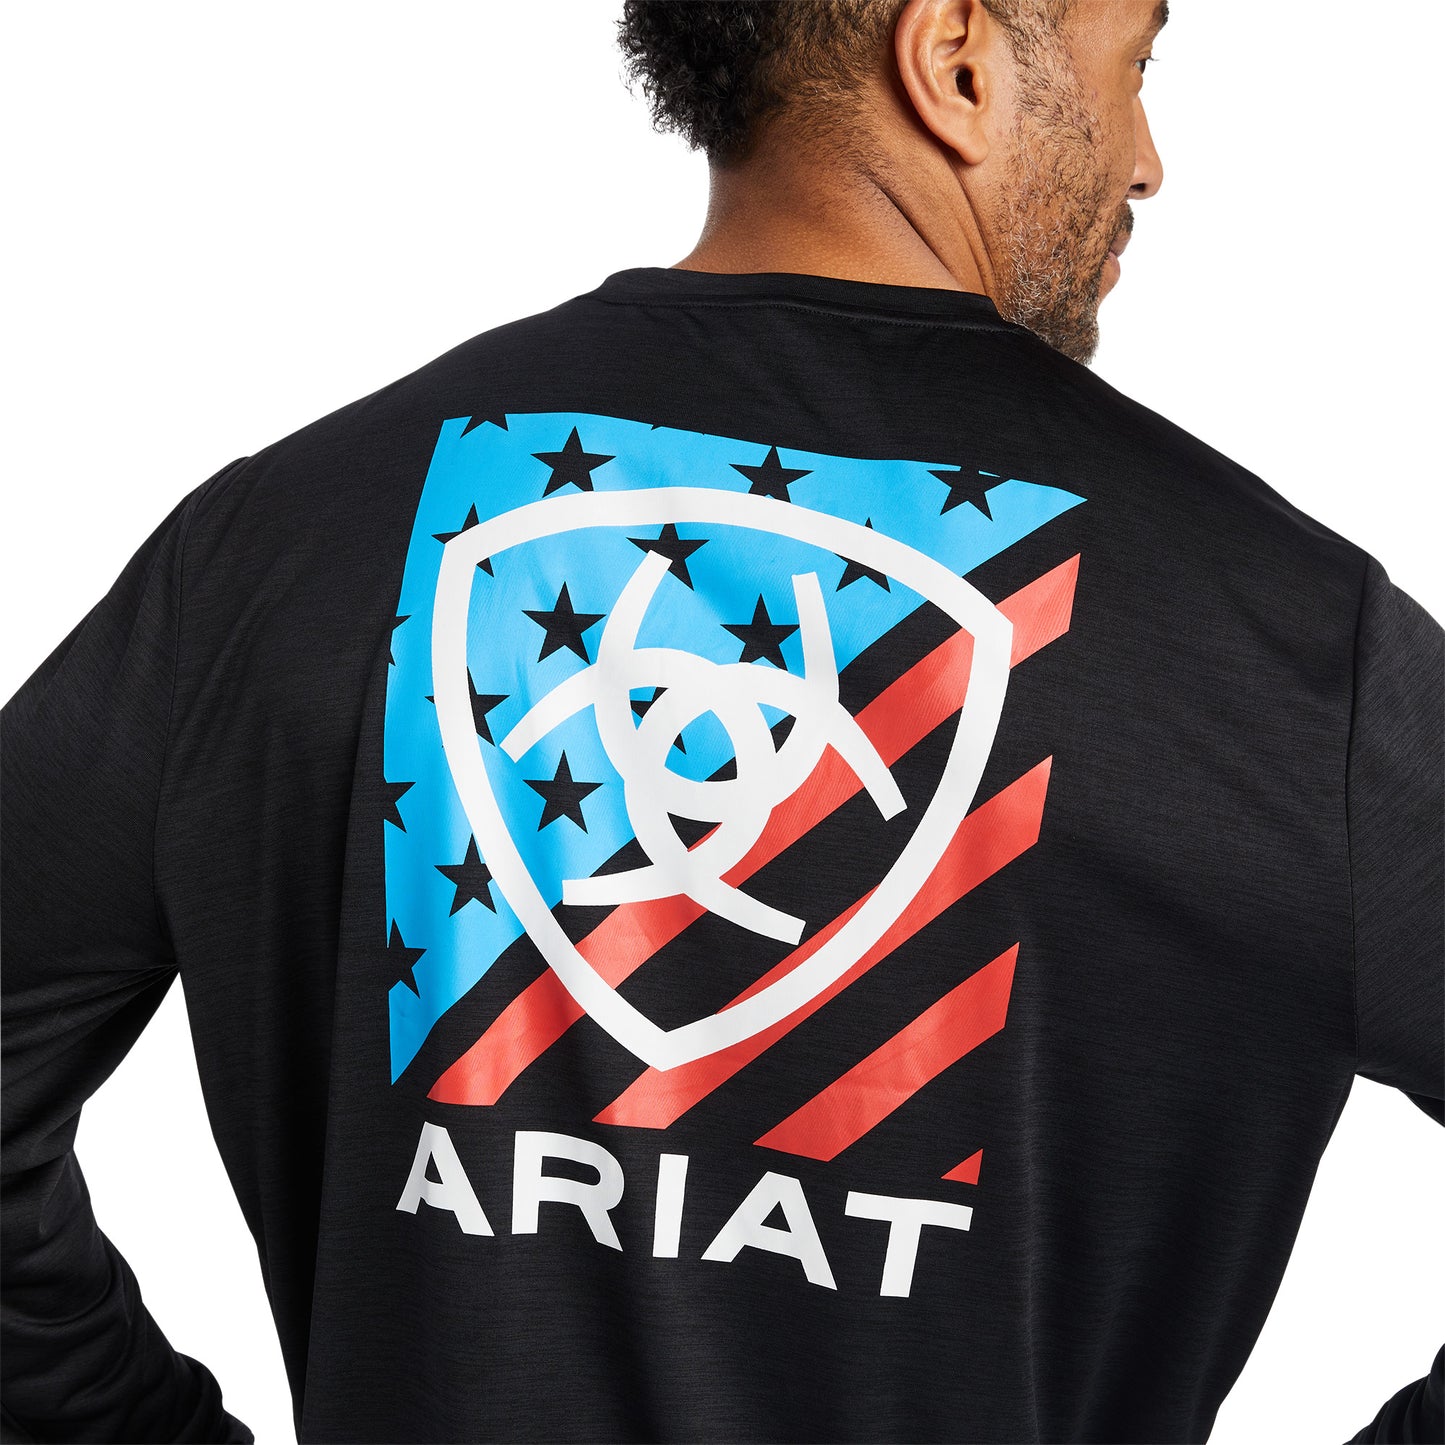 Ariat® Men's Charger Americana Black Graphic T-Shirt 10040991